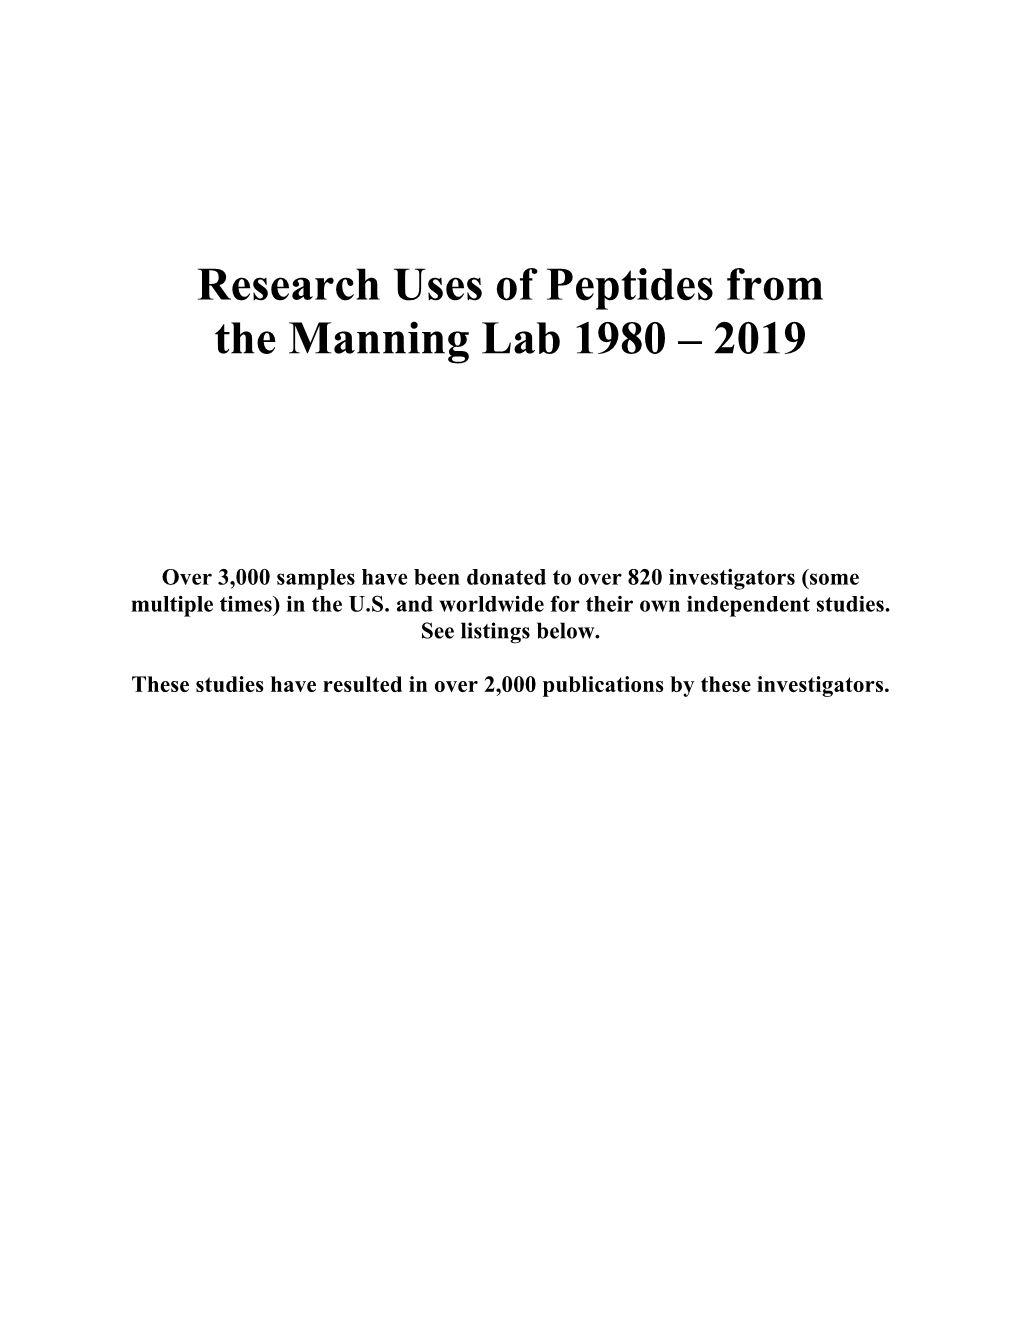 Research Uses of Peptides from the Manning Lab 1980 – 2019